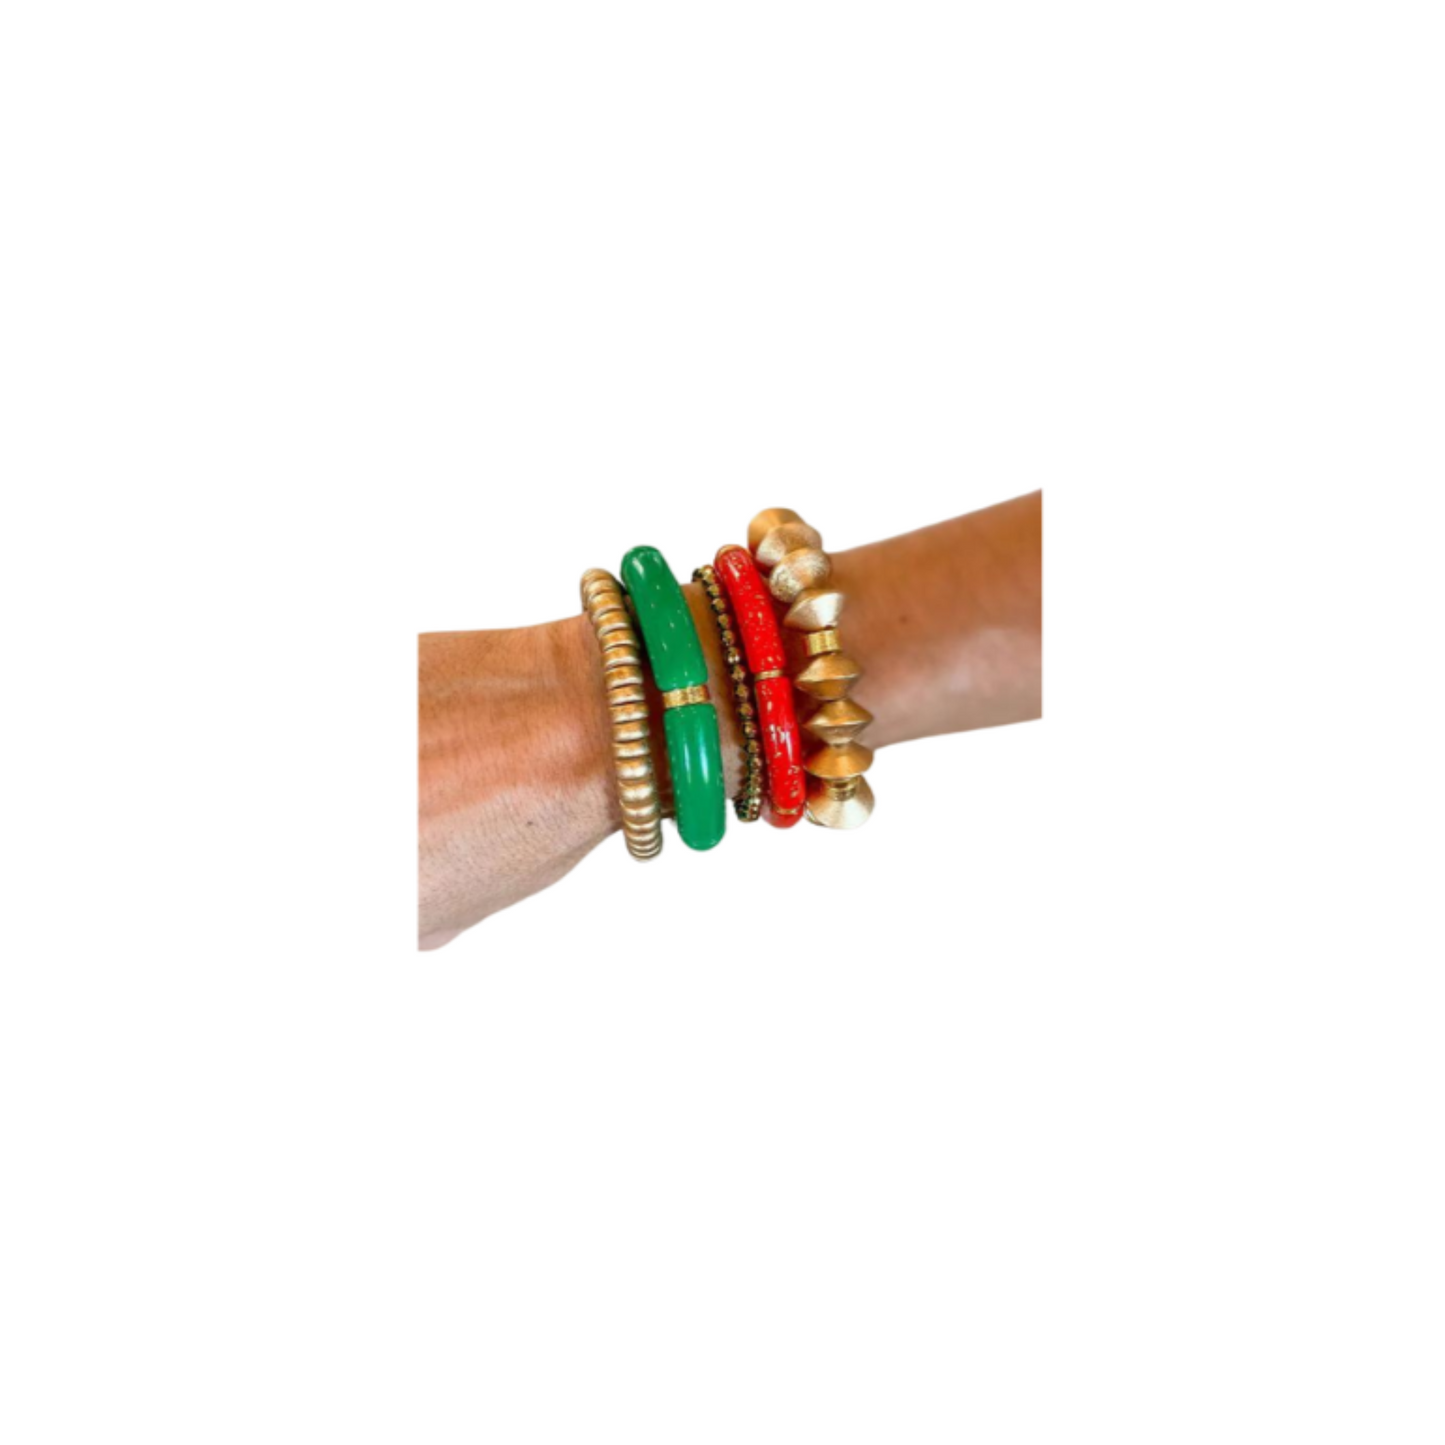 Raquel Christmas Stack by Millie B.